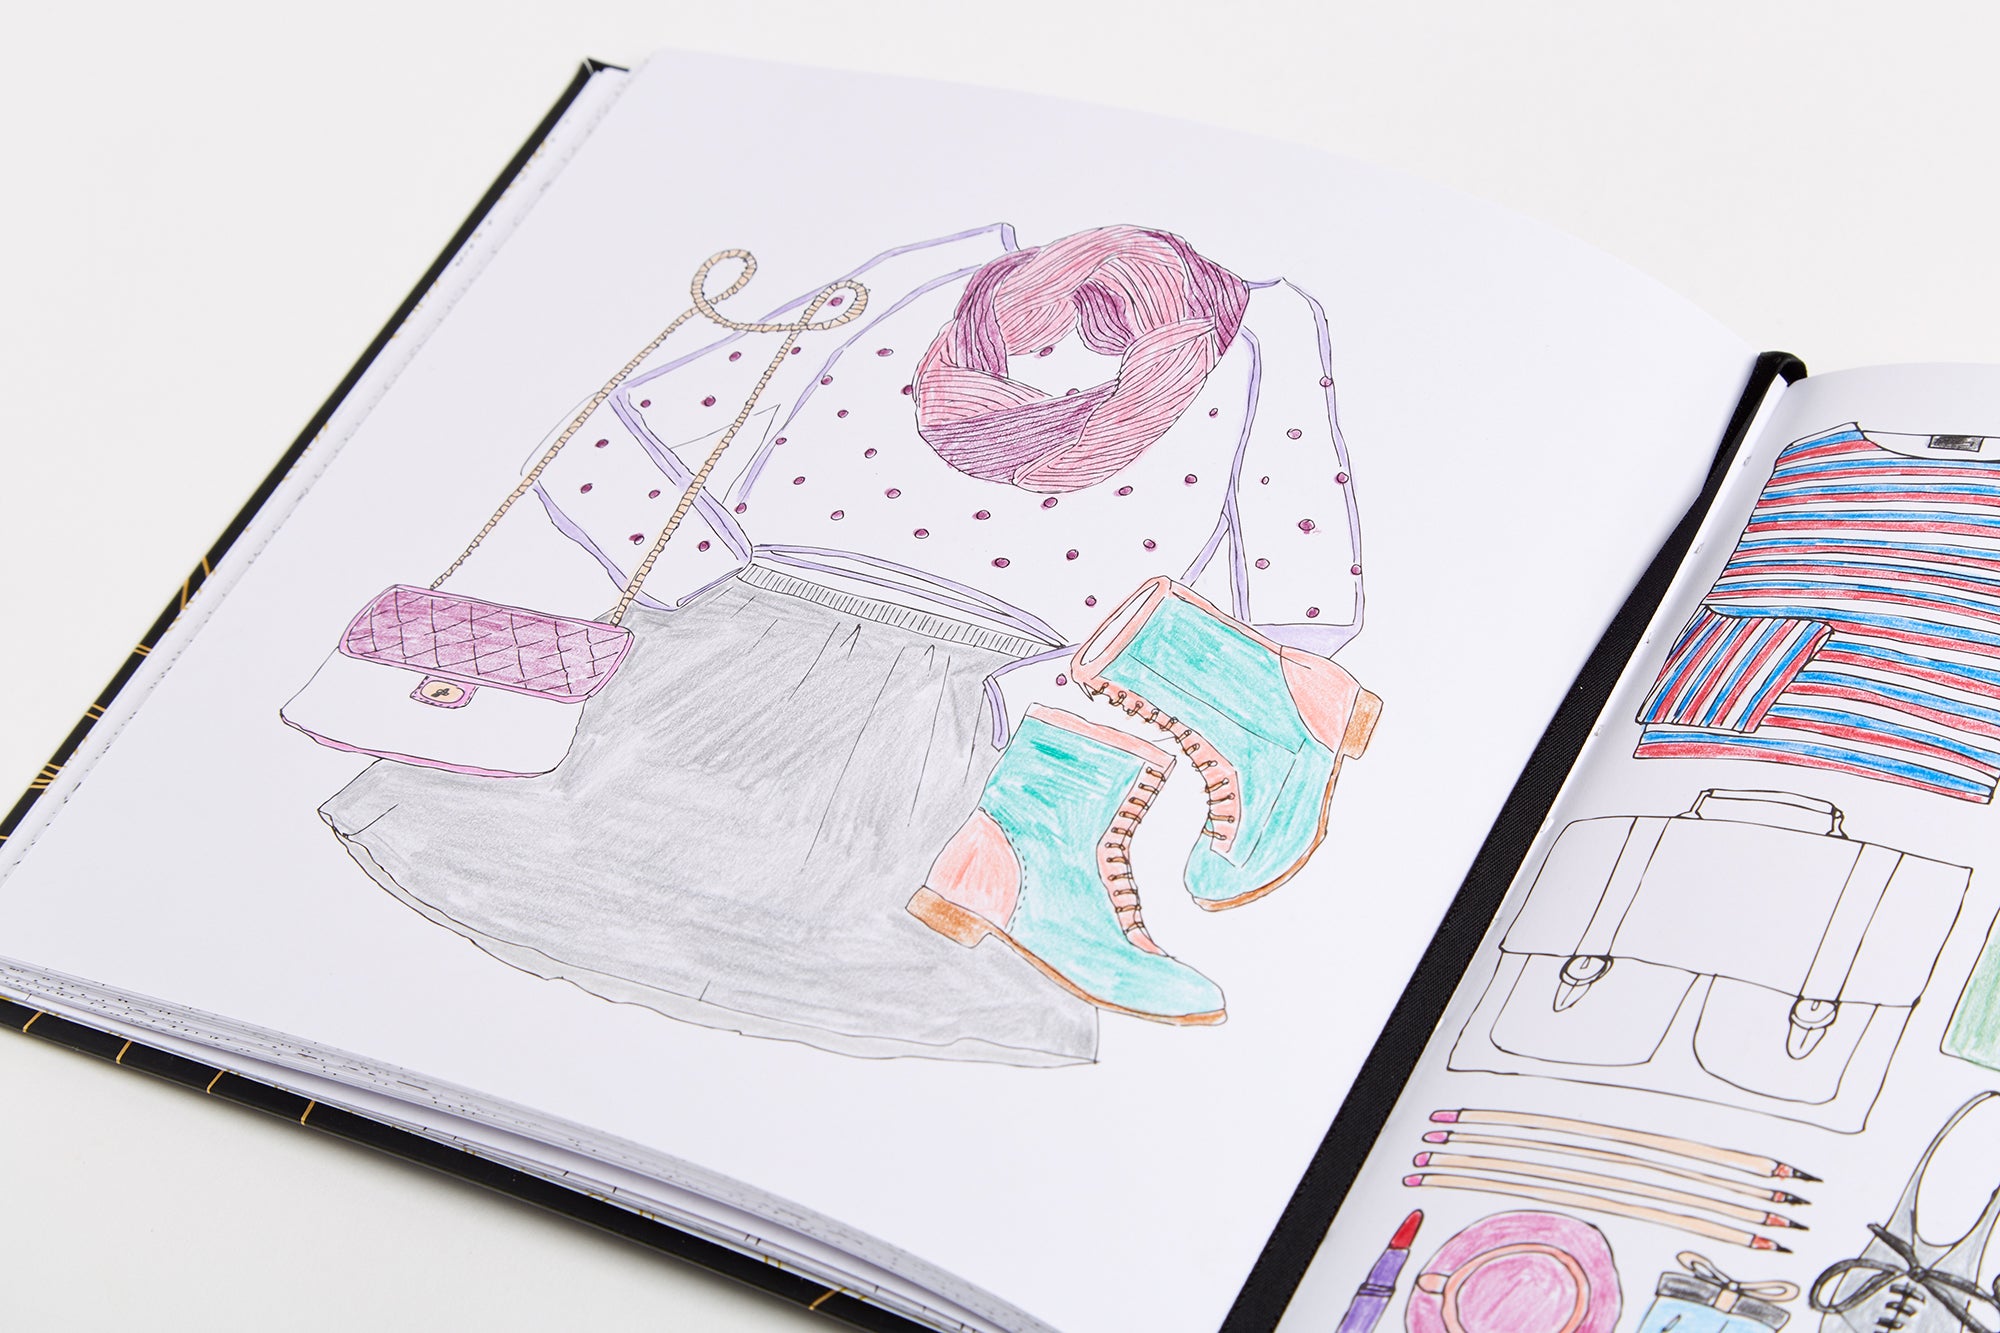 PARIS STREET STYLE: A Coloring Book